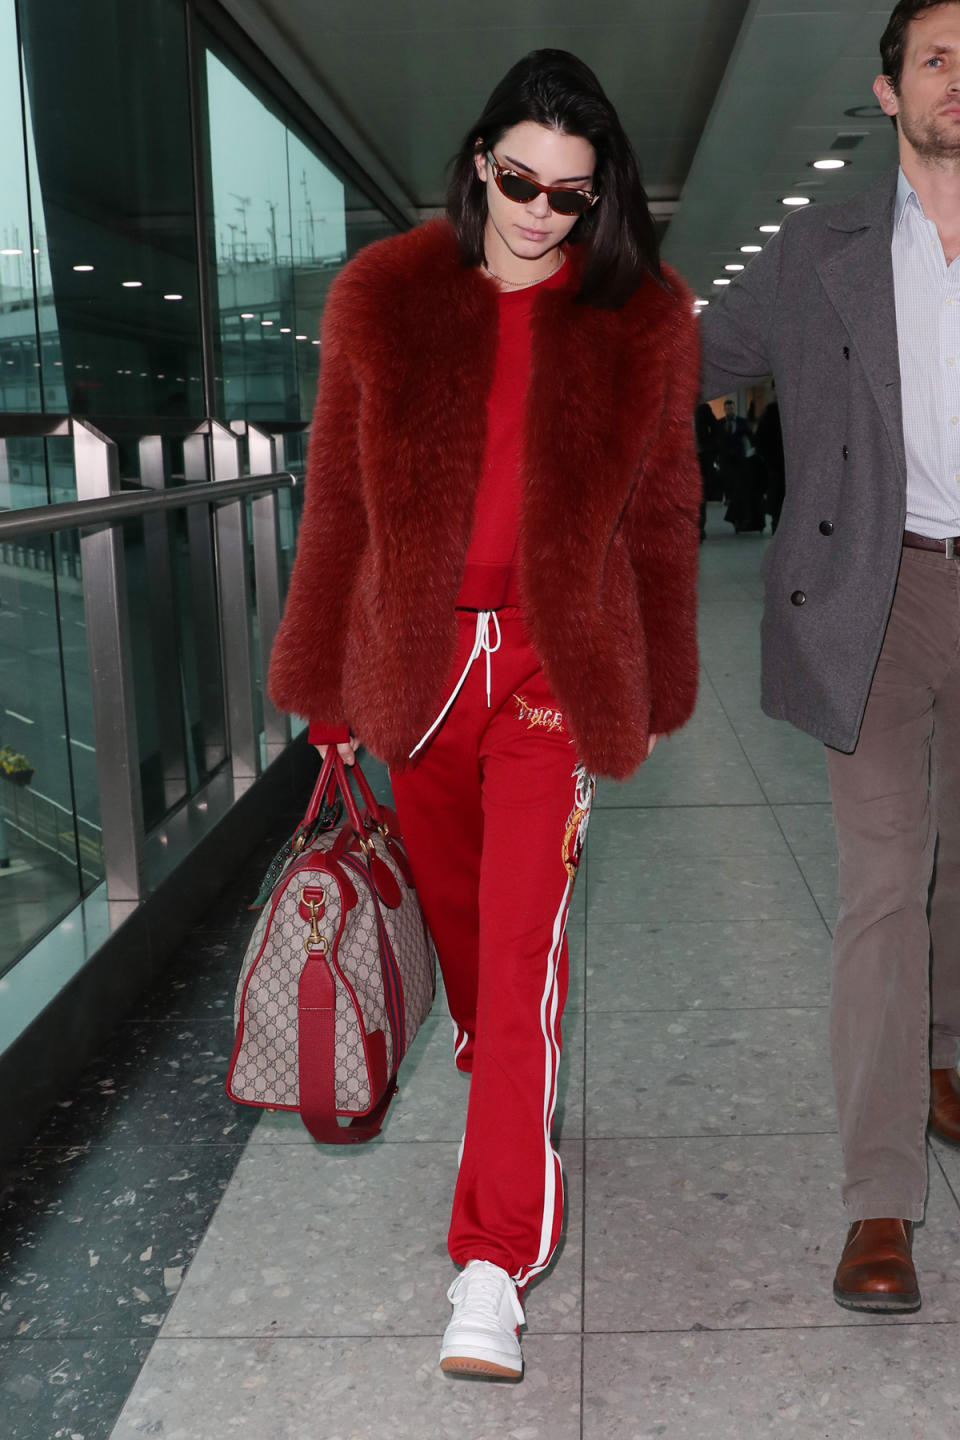 Kendall Jenner spotted in a Zeynep Arçay red fur coat at Heathrow Airport during London Fashion Week in February.